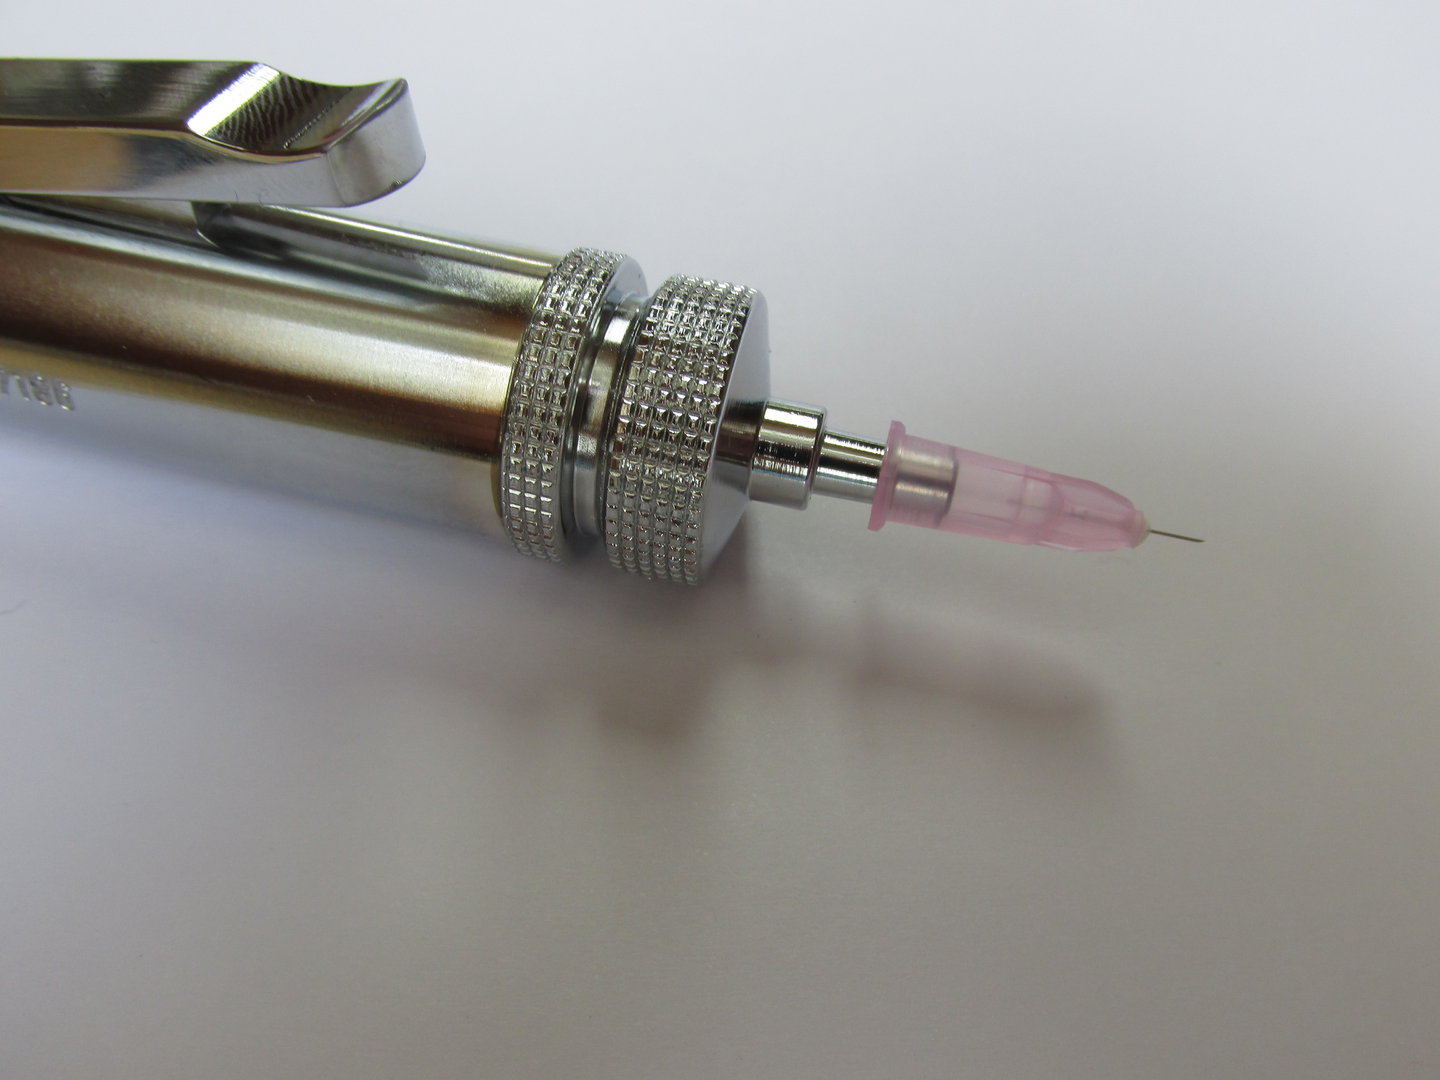 Carboxy Dolormed mesotherapy needle